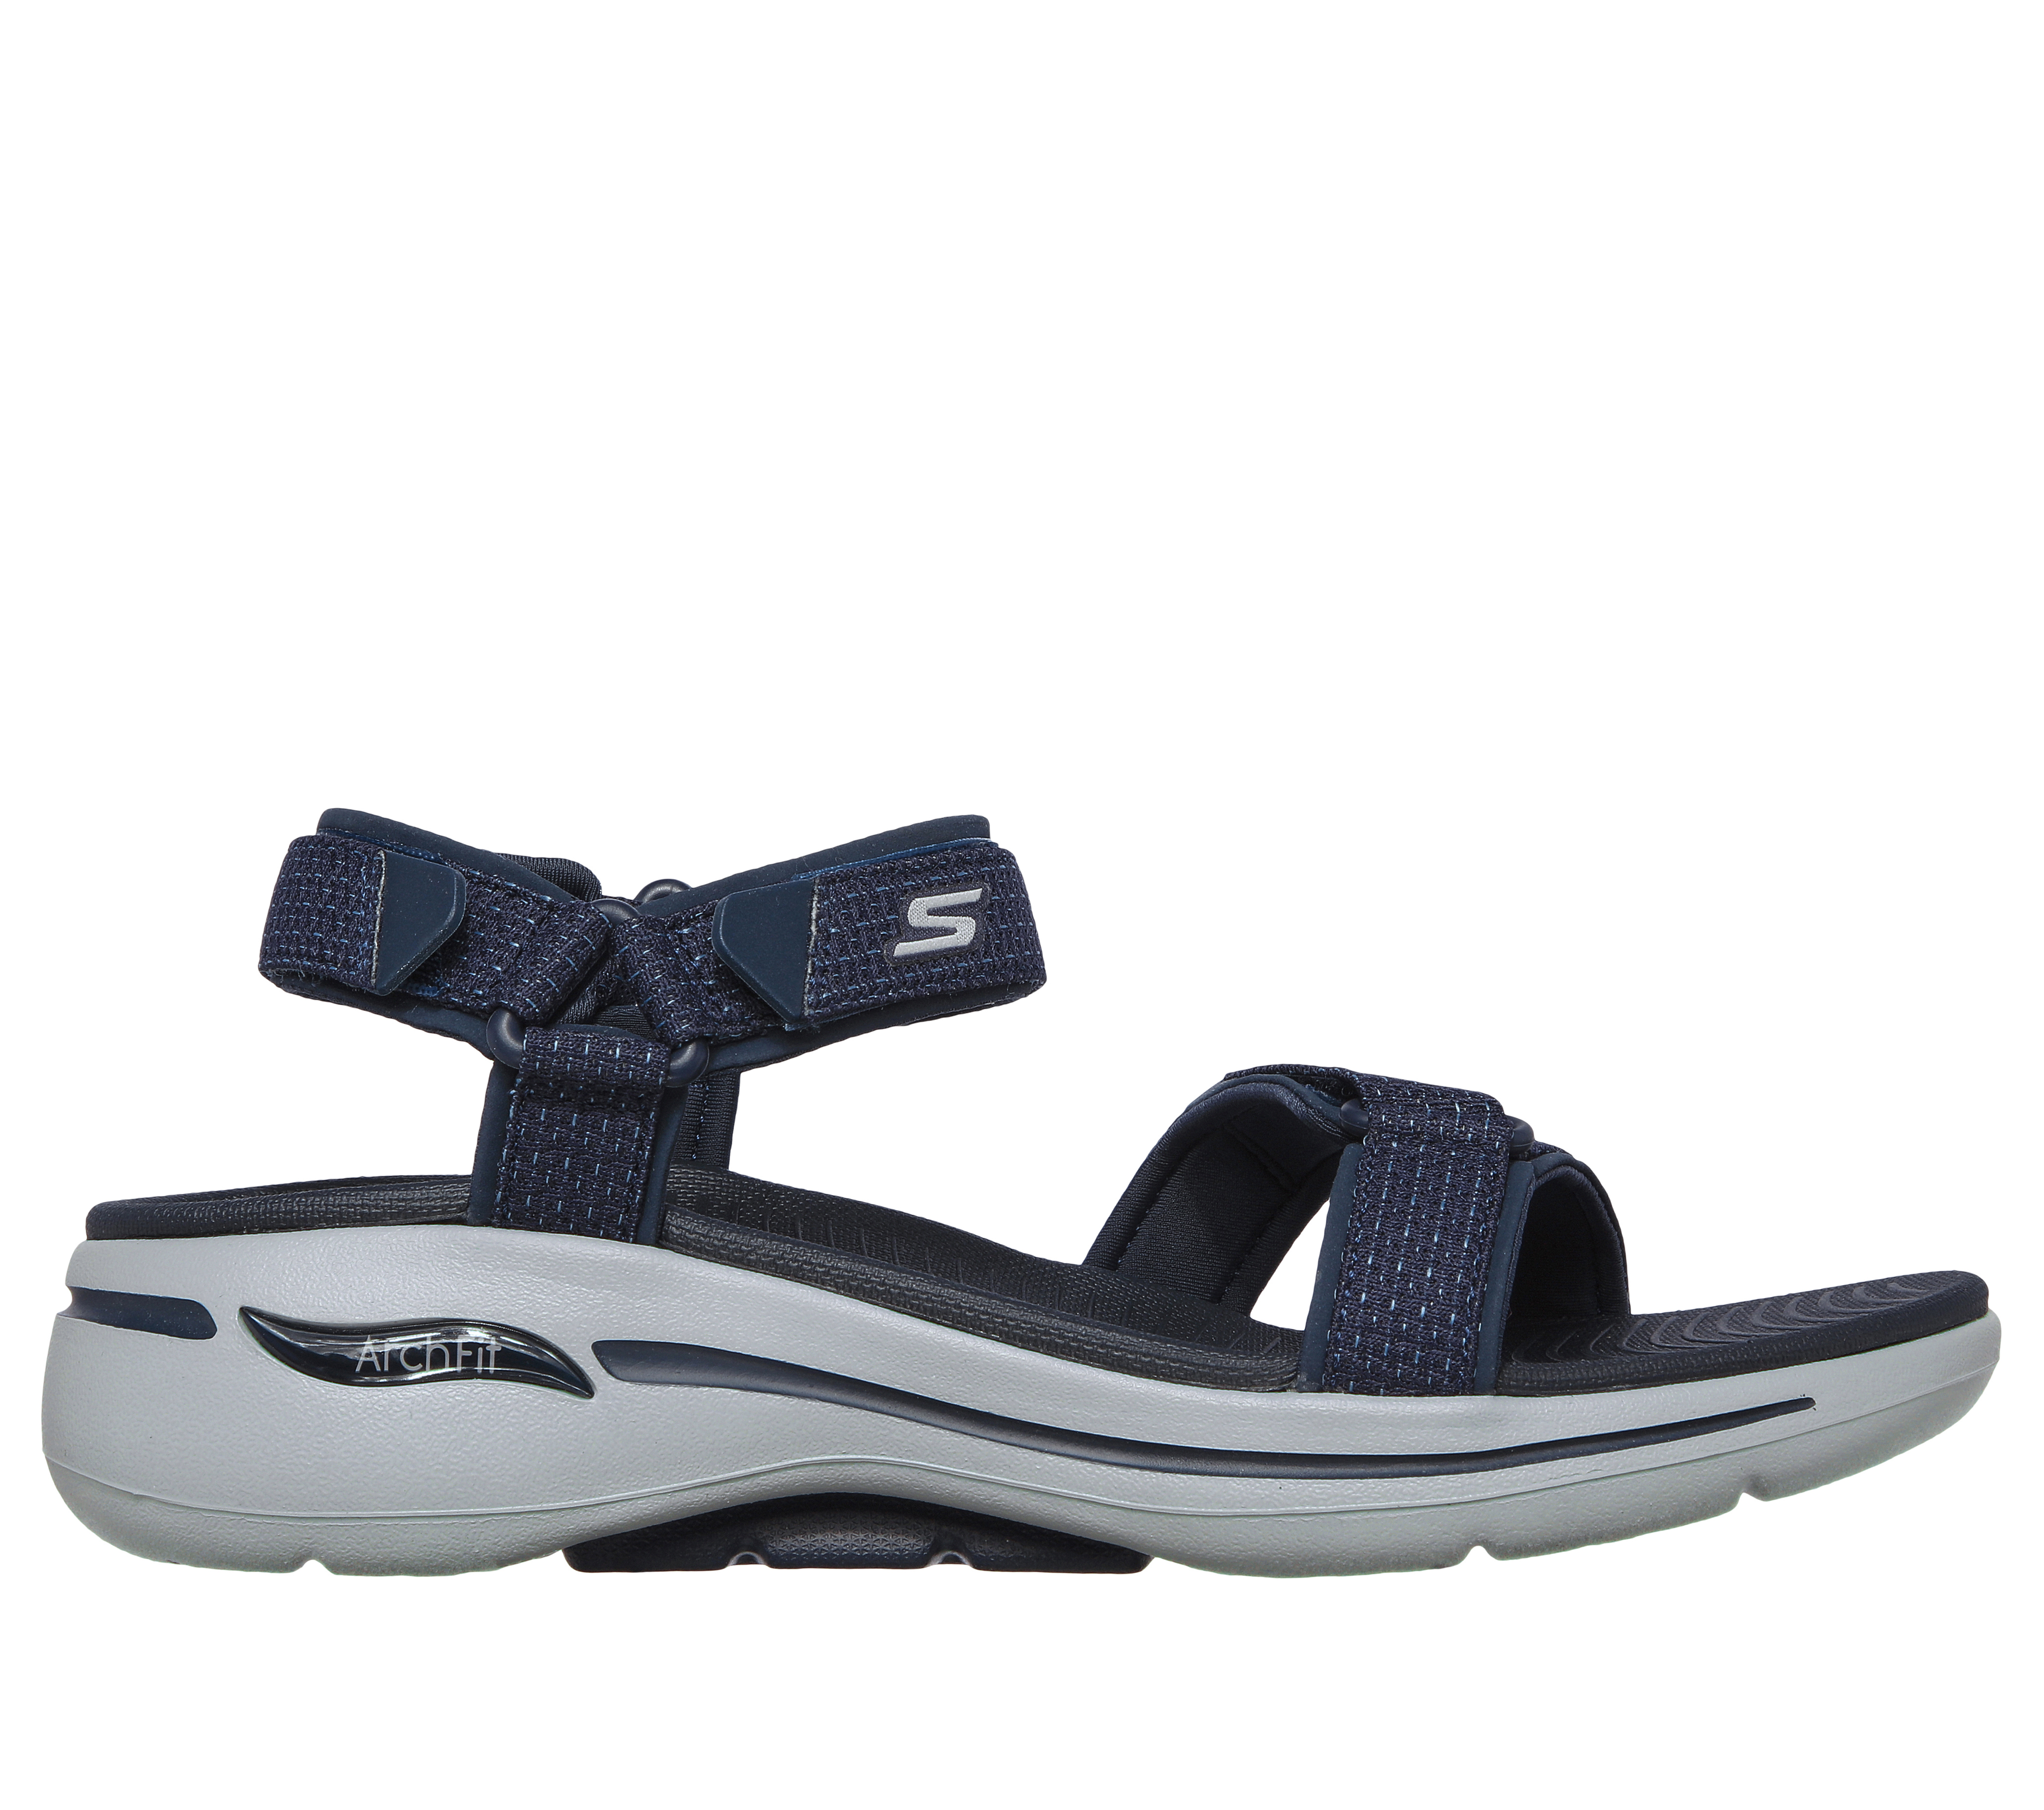 skechers relaxed fit upgrades sailin women's slide sandals